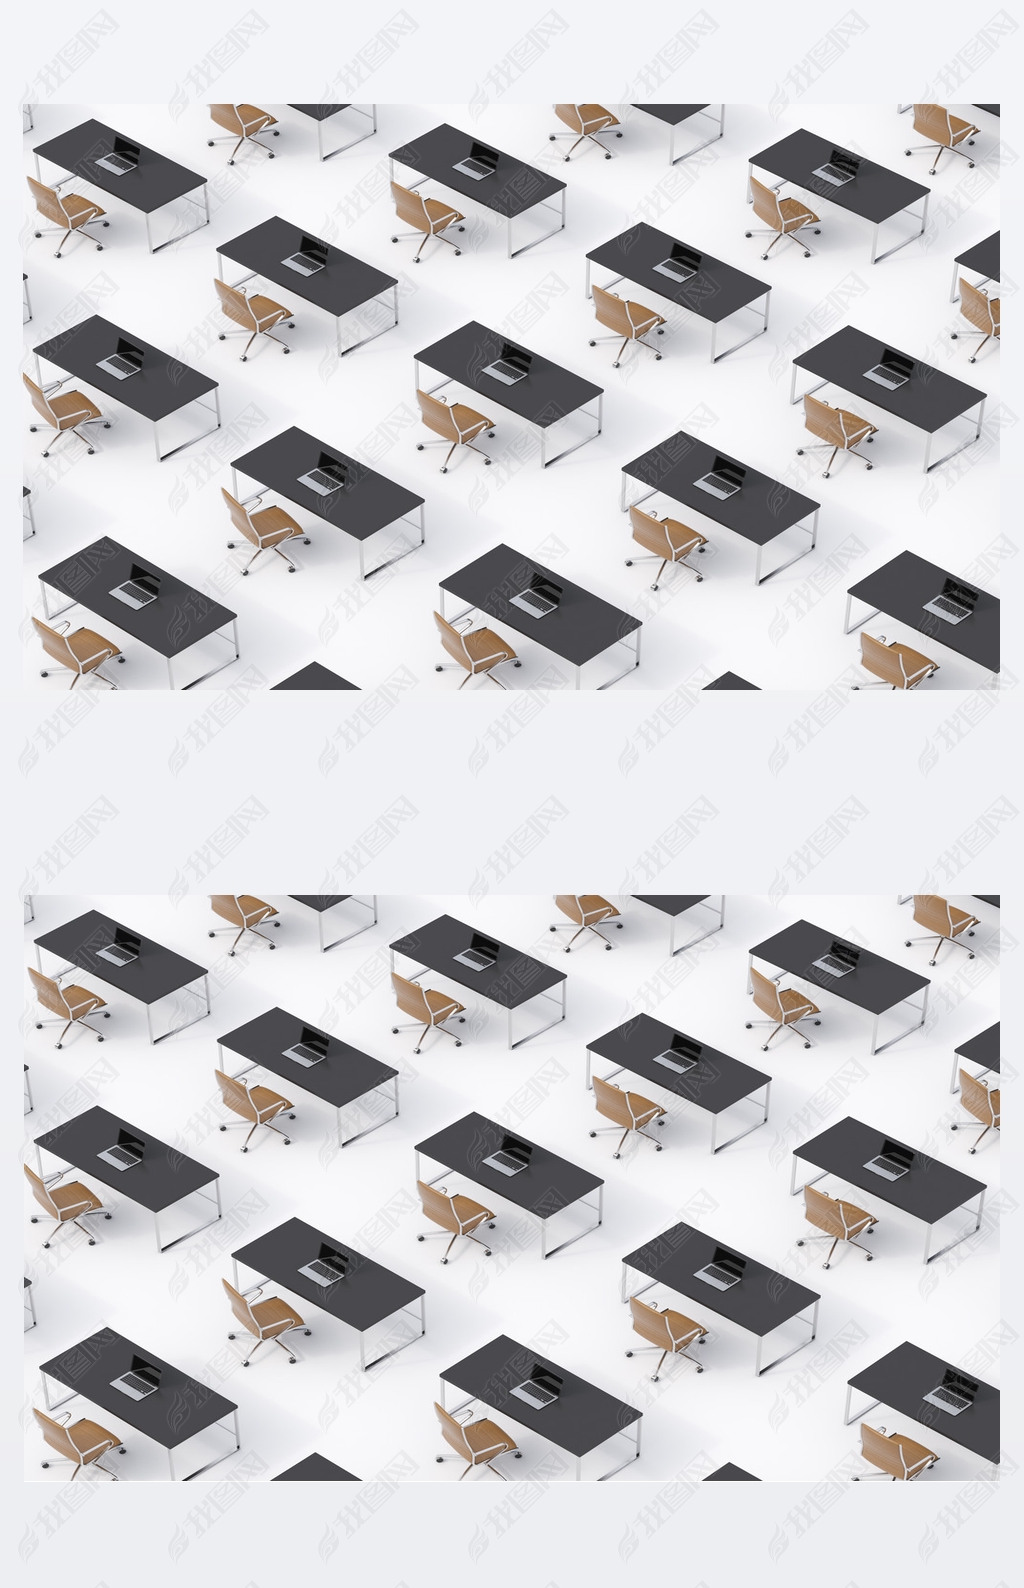 A top view of the symmetric corporate workplaces on white floor. A concept of corporate life in a hu